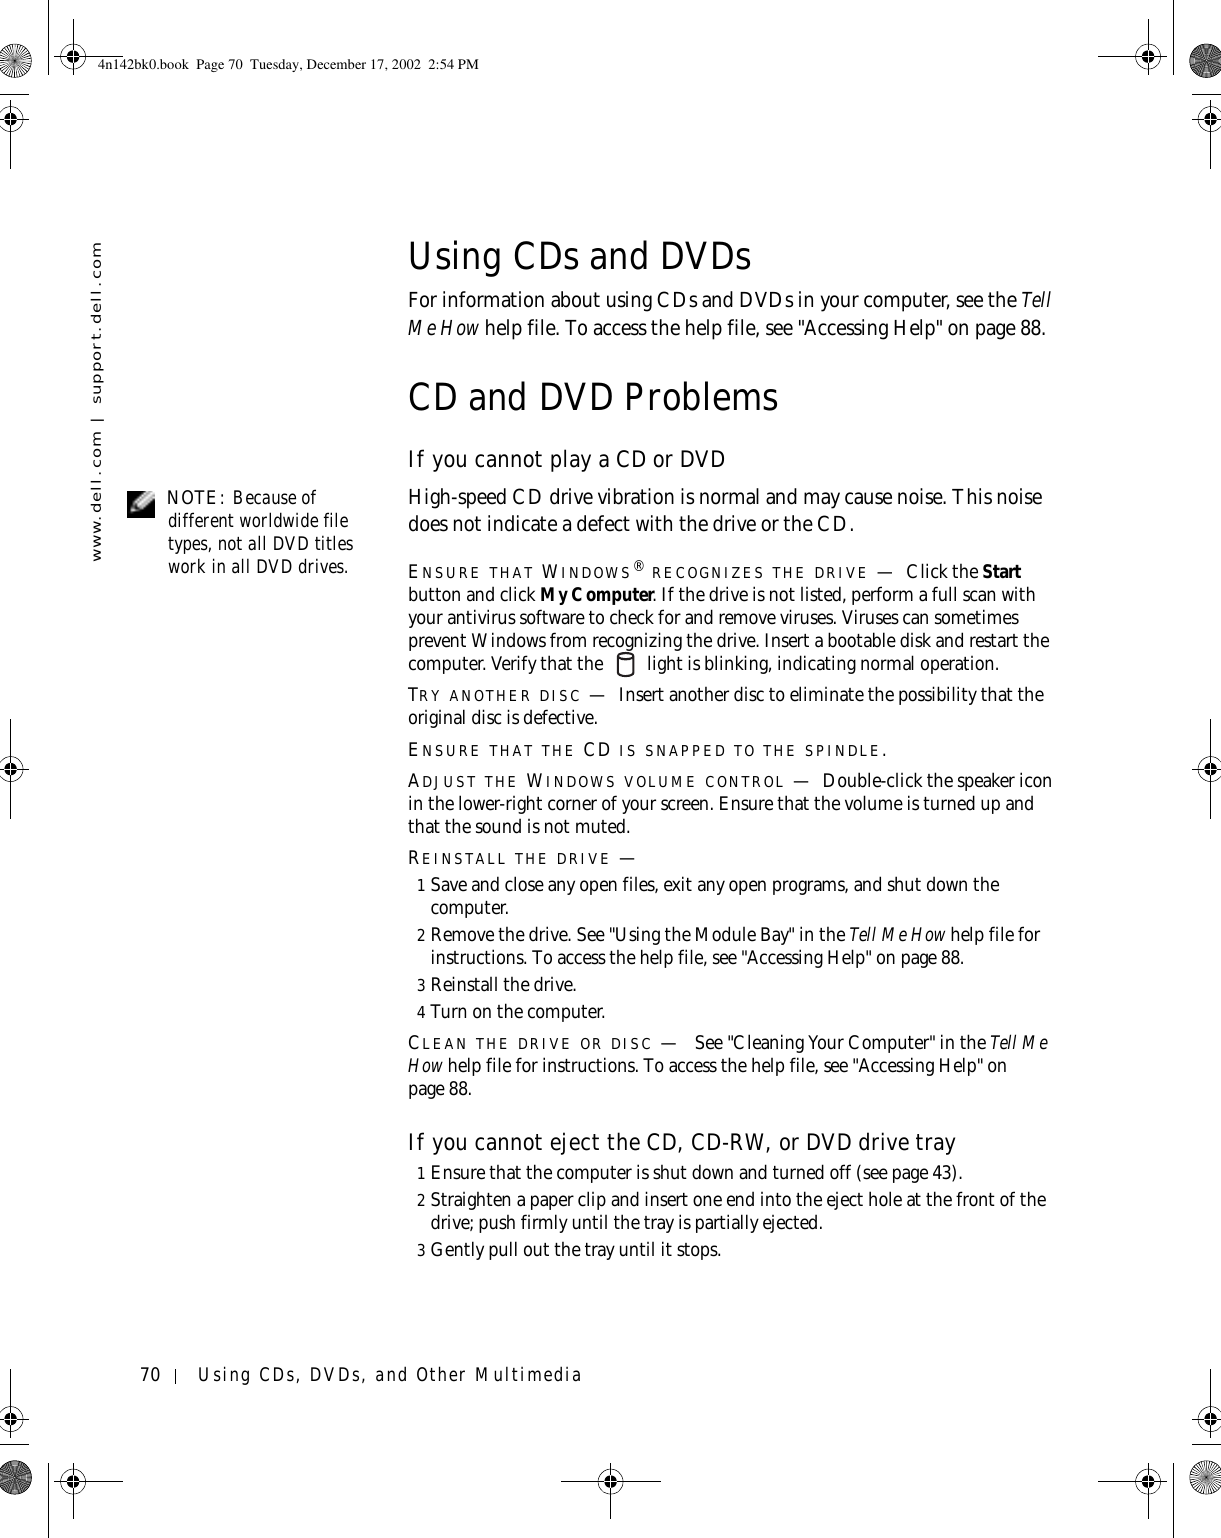 70 Using CDs, DVDs, and Other Multimediawww.dell.com | support.dell.comUsing CDs and DVDsFor information about using CDs and DVDs in your computer, see the Tell Me How help file. To access the help file, see &quot;Accessing Help&quot; on page 88.CD and DVD ProblemsIf you cannot play a CD or DVD NOTE: Because of different worldwide file types, not all DVD titles work in all DVD drives.High-speed CD drive vibration is normal and may cause noise. This noise does not indicate a defect with the drive or the CD.ENSURE THAT WINDOWS® RECOGNIZES THE DRIVE —Click the Start button and click My Computer. If the drive is not listed, perform a full scan with your antivirus software to check for and remove viruses. Viruses can sometimes prevent Windows from recognizing the drive. Insert a bootable disk and restart the computer. Verify that the   light is blinking, indicating normal operation.TRY ANOTHER DISC —Insert another disc to eliminate the possibility that the original disc is defective.ENSURE THAT THE CD IS SNAPPED TO THE SPINDLE.ADJUST THE WINDOWS VOLUME CONTROL —Double-click the speaker icon in the lower-right corner of your screen. Ensure that the volume is turned up and that the sound is not muted. REINSTALL THE DRIVE —1Save and close any open files, exit any open programs, and shut down the computer.2Remove the drive. See &quot;Using the Module Bay&quot; in the Tell Me How help file for instructions. To access the help file, see &quot;Accessing Help&quot; on page 88.3Reinstall the drive.4Turn on the computer.CLEAN THE DRIVE OR DISC — See &quot;Cleaning Your Computer&quot; in the Tell Me How help file for instructions. To access the help file, see &quot;Accessing Help&quot; on page 88.If you cannot eject the CD, CD-RW, or DVD drive tray1Ensure that the computer is shut down and turned off (see page 43).2Straighten a paper clip and insert one end into the eject hole at the front of the drive; push firmly until the tray is partially ejected.3Gently pull out the tray until it stops.4n142bk0.book  Page 70  Tuesday, December 17, 2002  2:54 PM